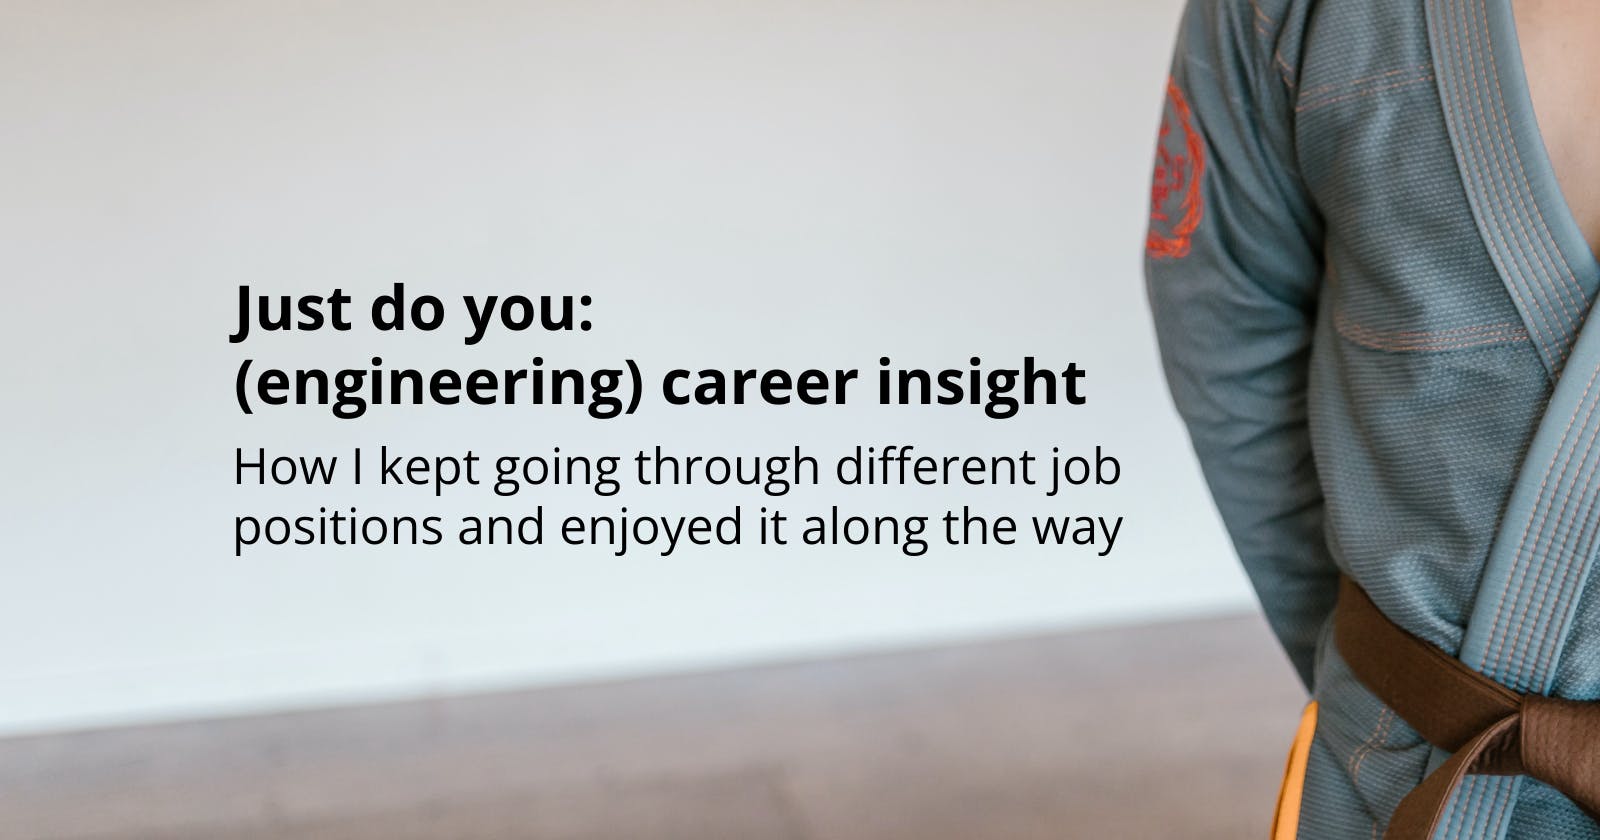 Just do you: (engineering) career insight